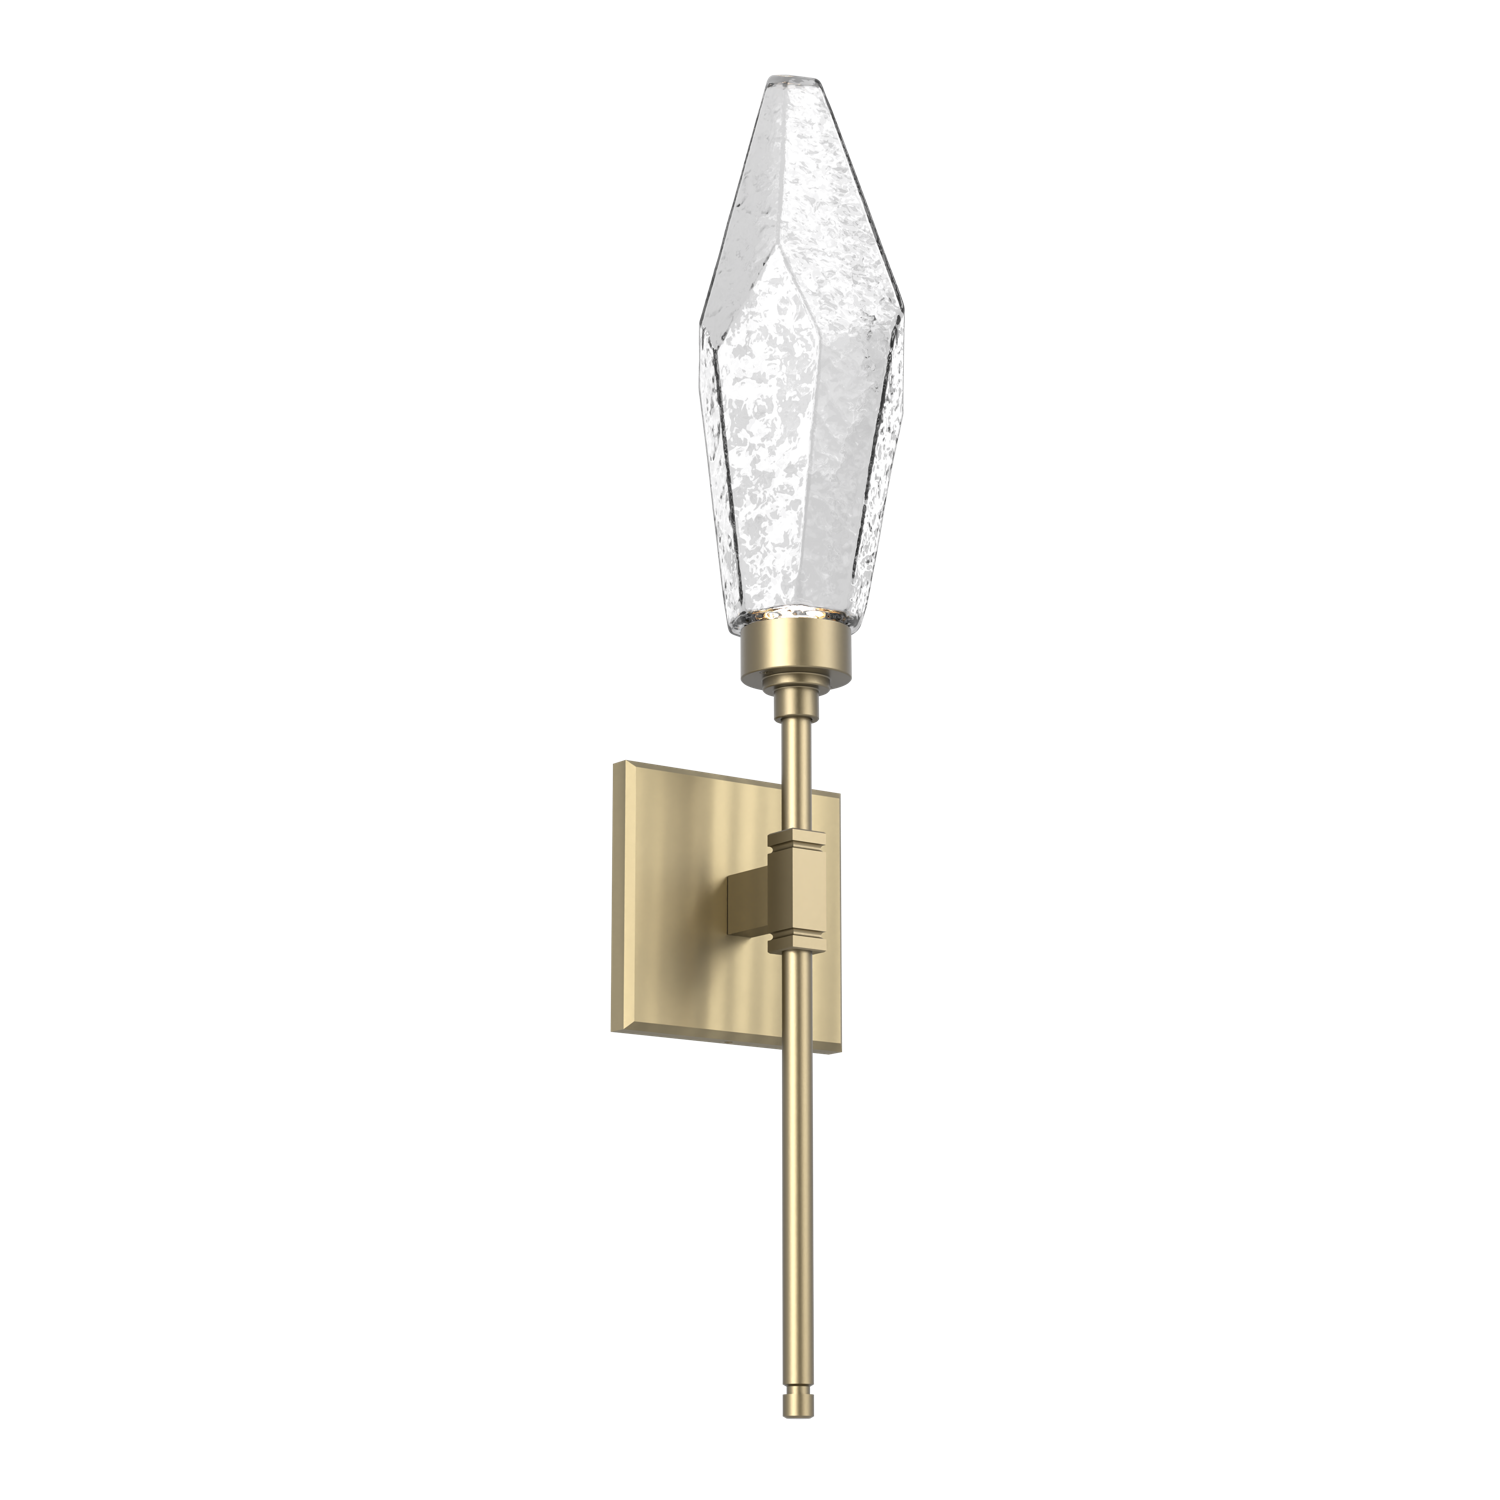 IDB0050-04-HB-CC-Hammerton-Studio-Rock-Crystal-ada-certified-belvedere-wall-sconce-with-heritage-brass-finish-and-clear-glass-shades-and-LED-lamping